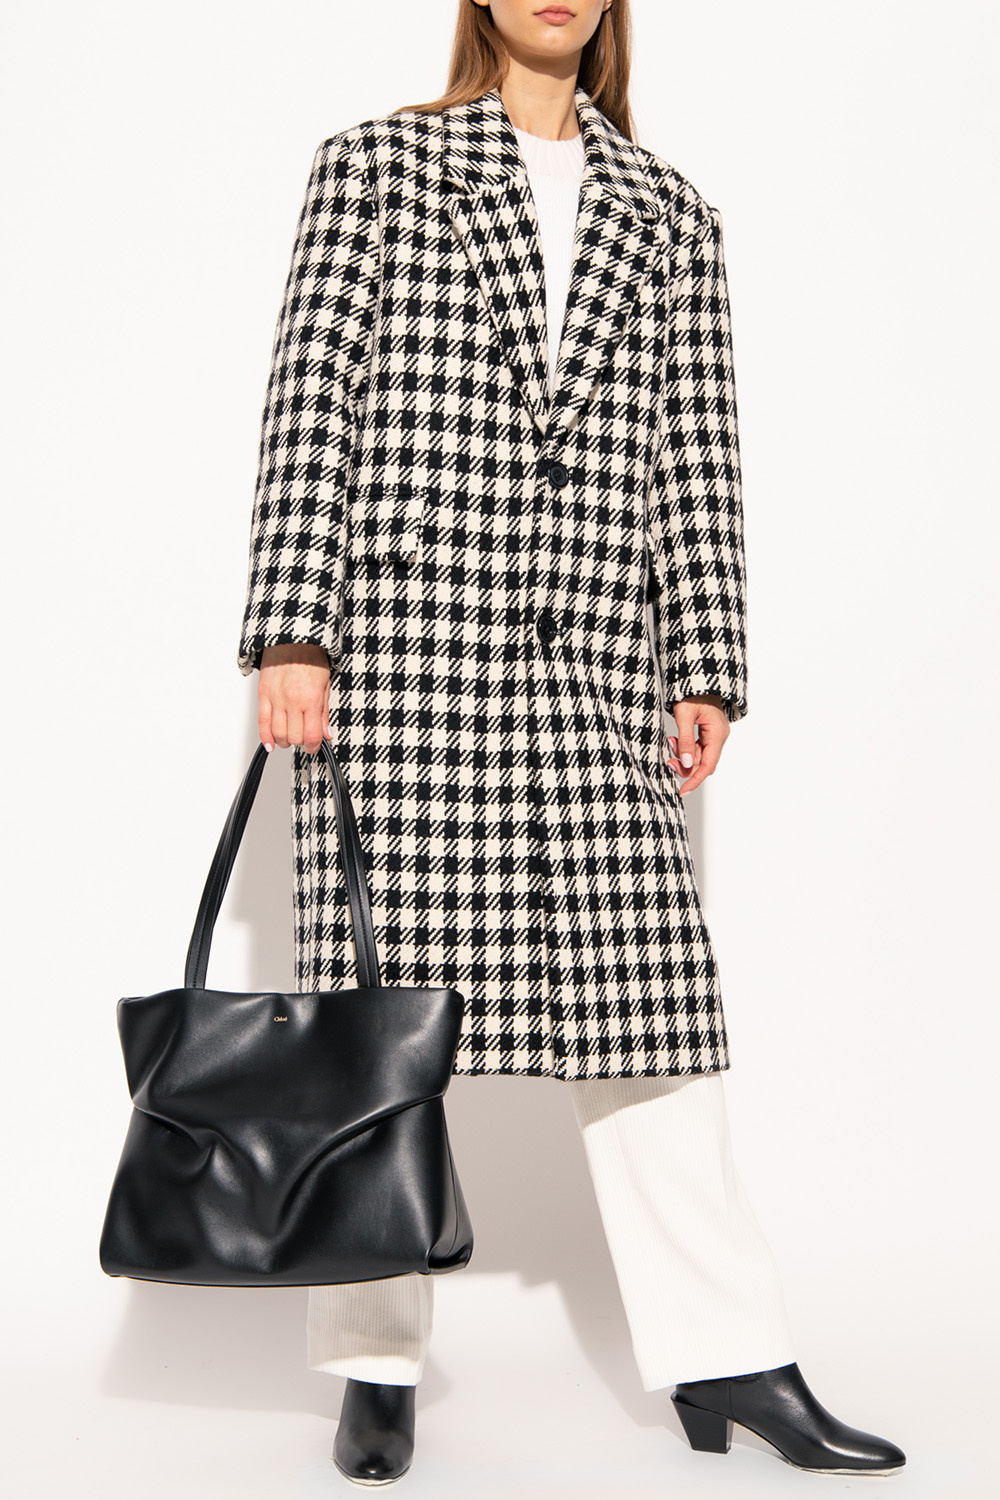 EXTRAVAGANCE & GLAMOUR Patterned coat